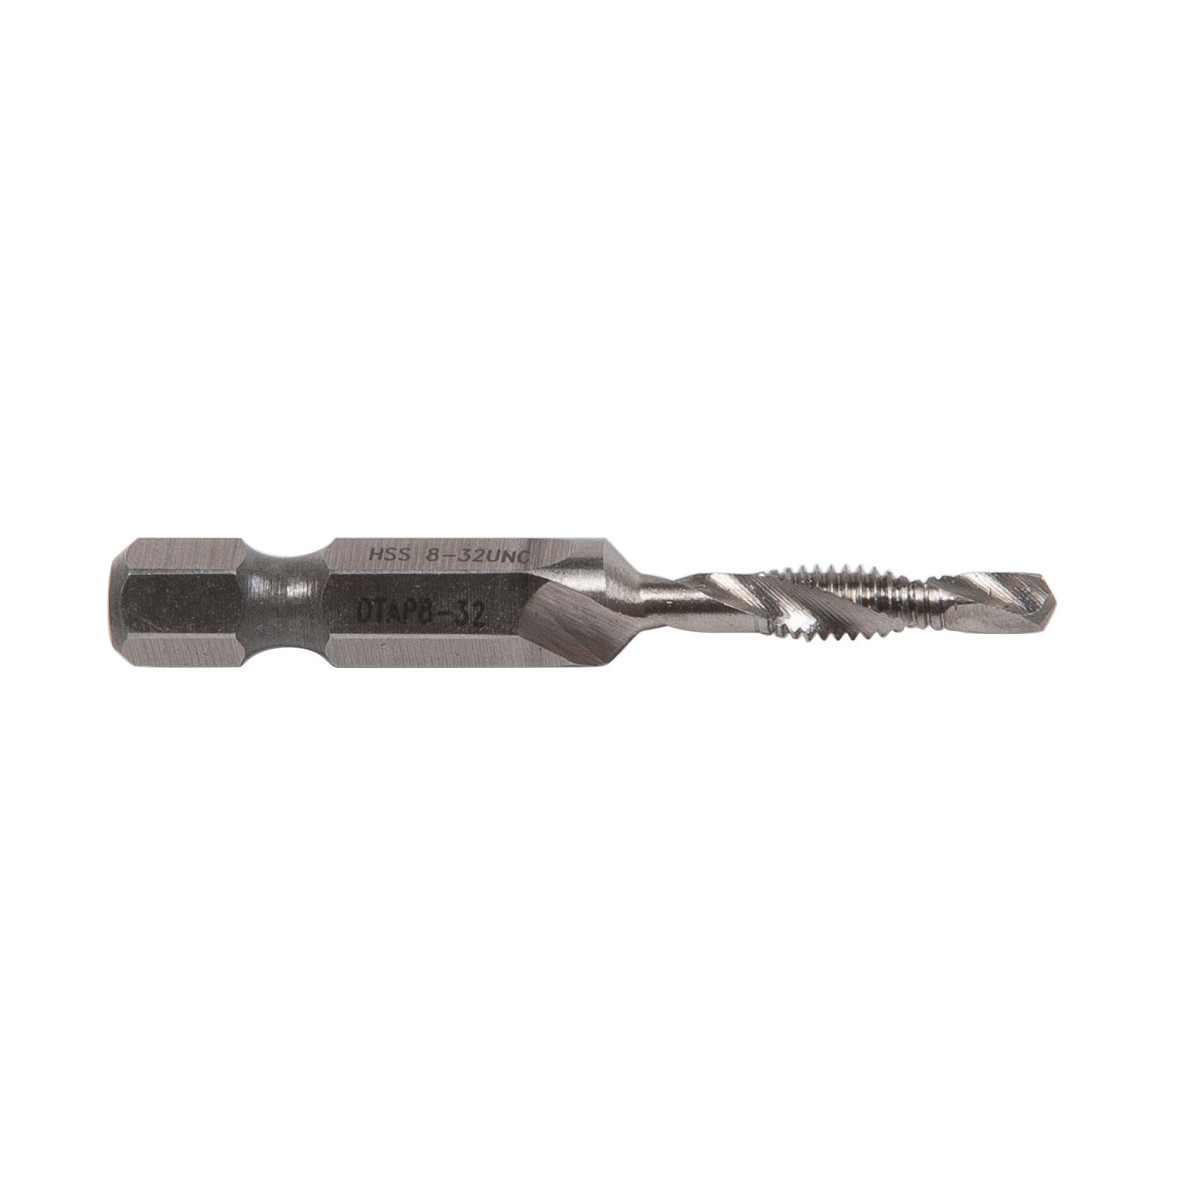 Combination Drill/Tap Bits.  8-32NC.  Complete hole drilling, tapping and deburring/countersinking in one operation with power drill saves labor and time.  Back tapered beyond tap to prevent thread damage from over-drilling.  Deburr/countersink also provided on bit beyond back taper.  Made from hardened high-speed steel vs. carbon steel for longer life.  High quality hex shank to ensure strong connection to drill chuck.  Designed to tap up to 10-gauge metal.  Quick change adaptor included in both metric and standard kits.